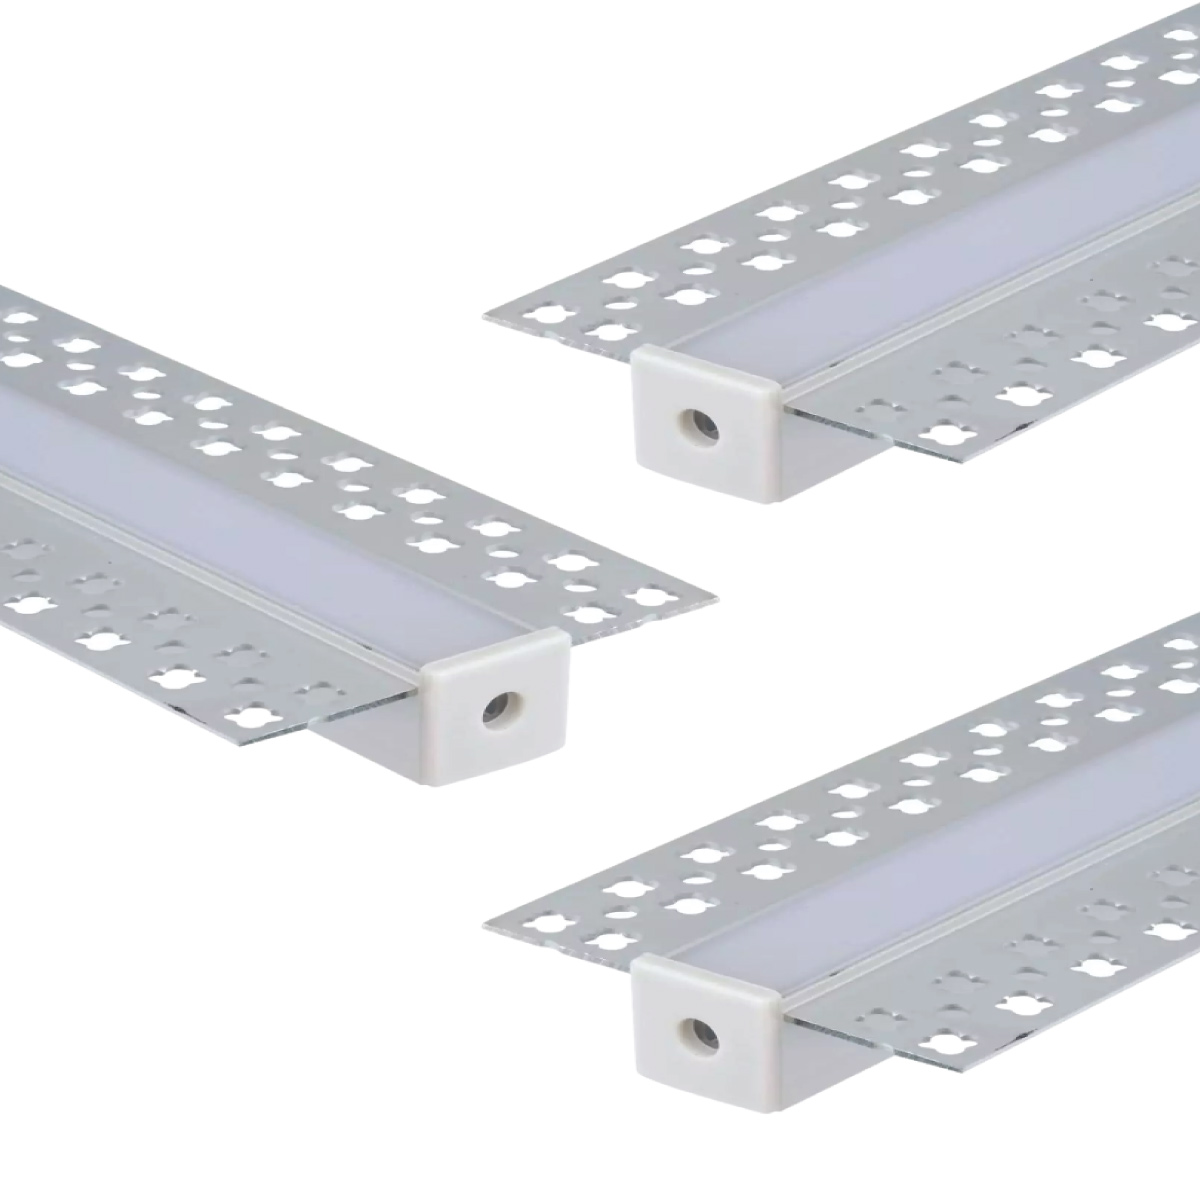 View Pack of 3 Trimless Plaster In Aluminium Profiles With Diffuser End Caps 2m Long information